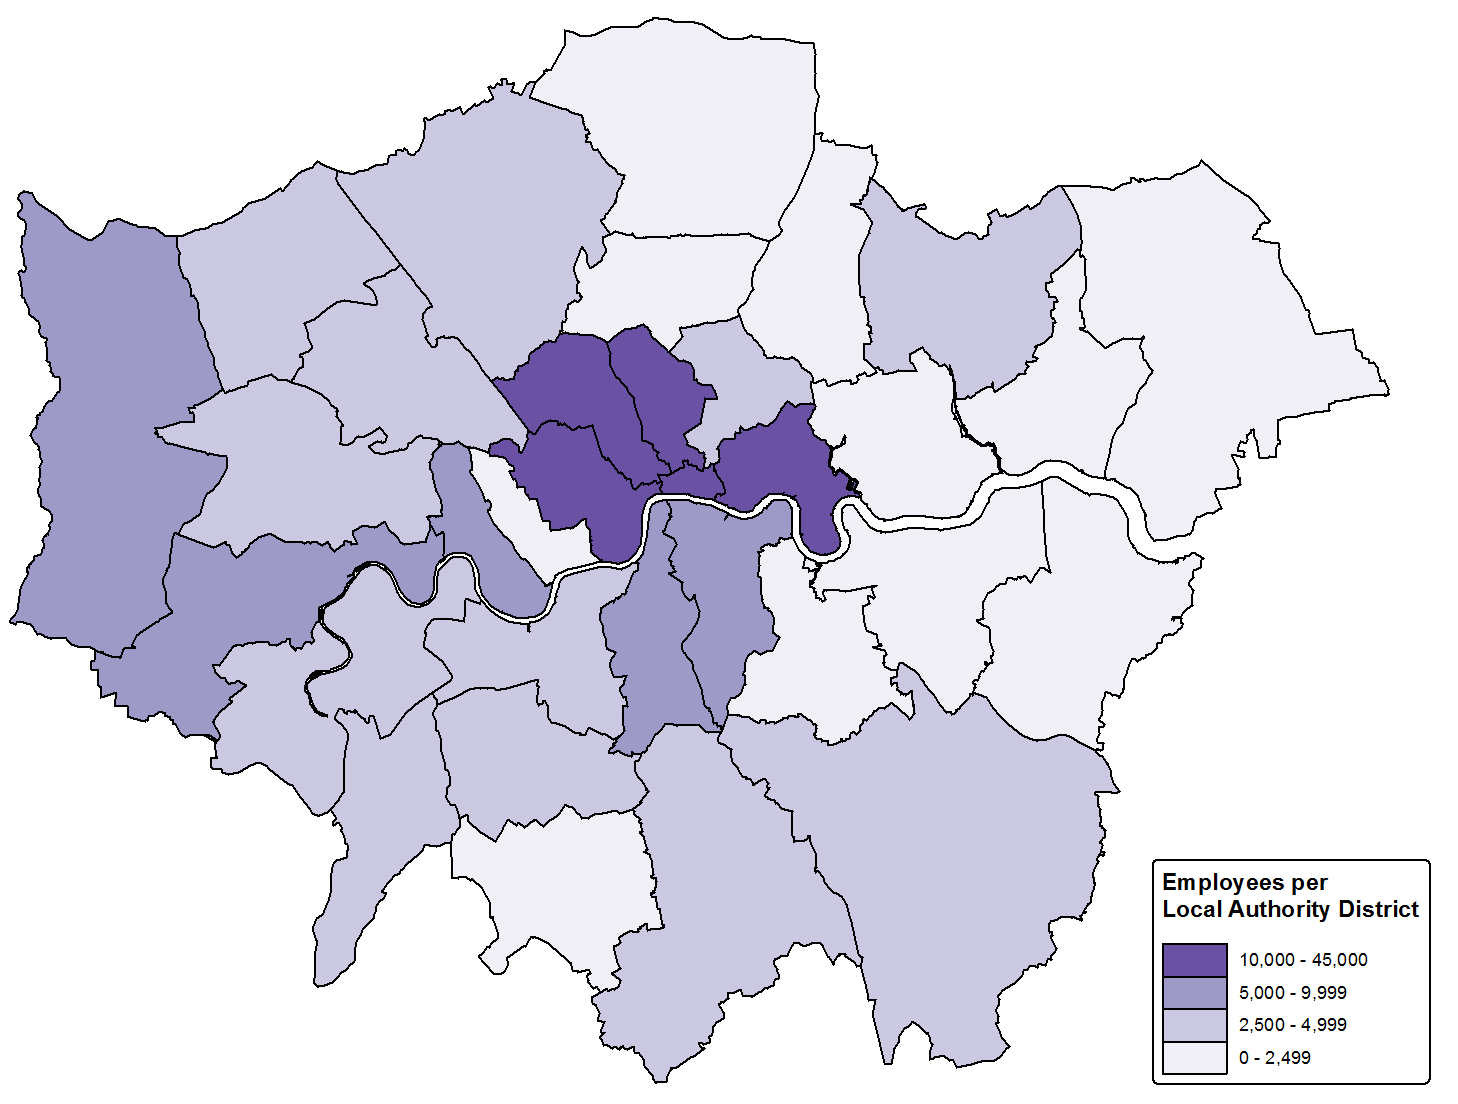 Employees in Information Technology in 2015 were concentrated in inner London, especially in The City, Tower Hamlets, Camden, Islington and Westminster, with lower concentrations in western and southern London